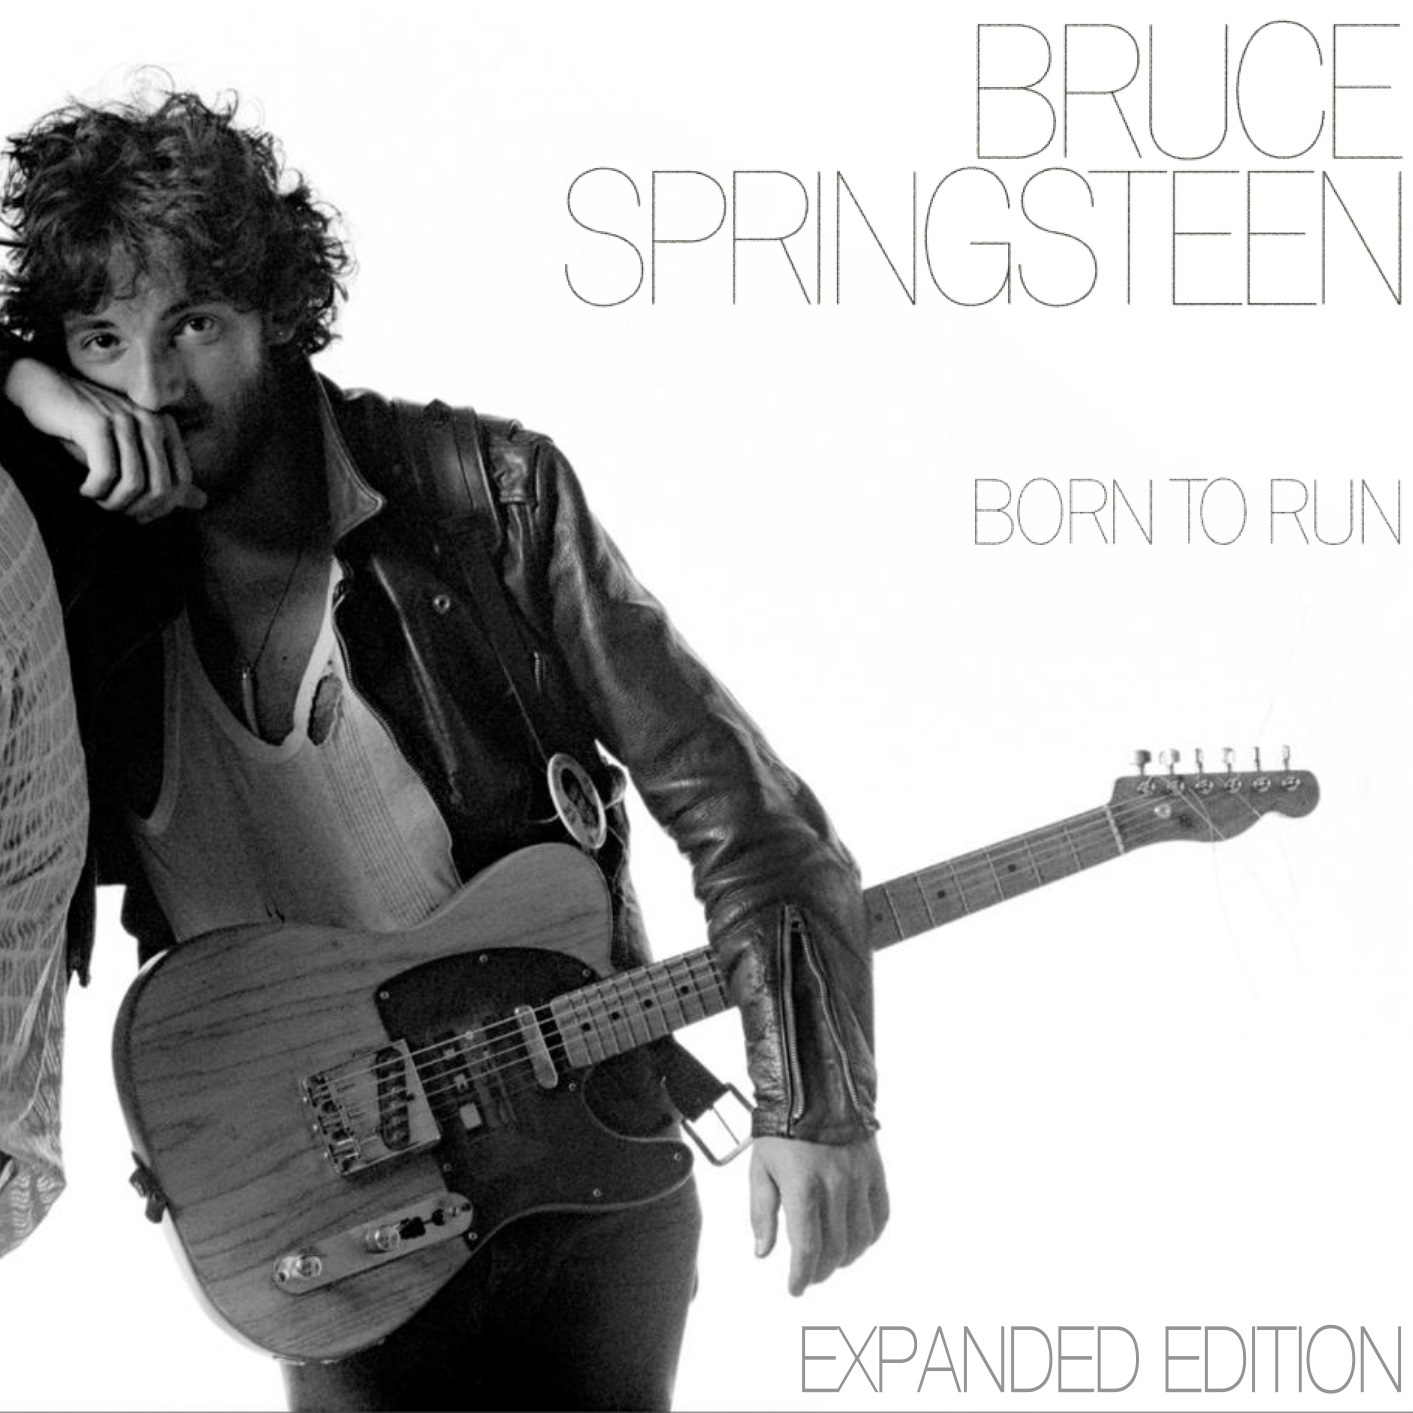 Primary image for Bruce Springsteen - Born To Run [Expanded Edition] [CD] She's The One Jungleland